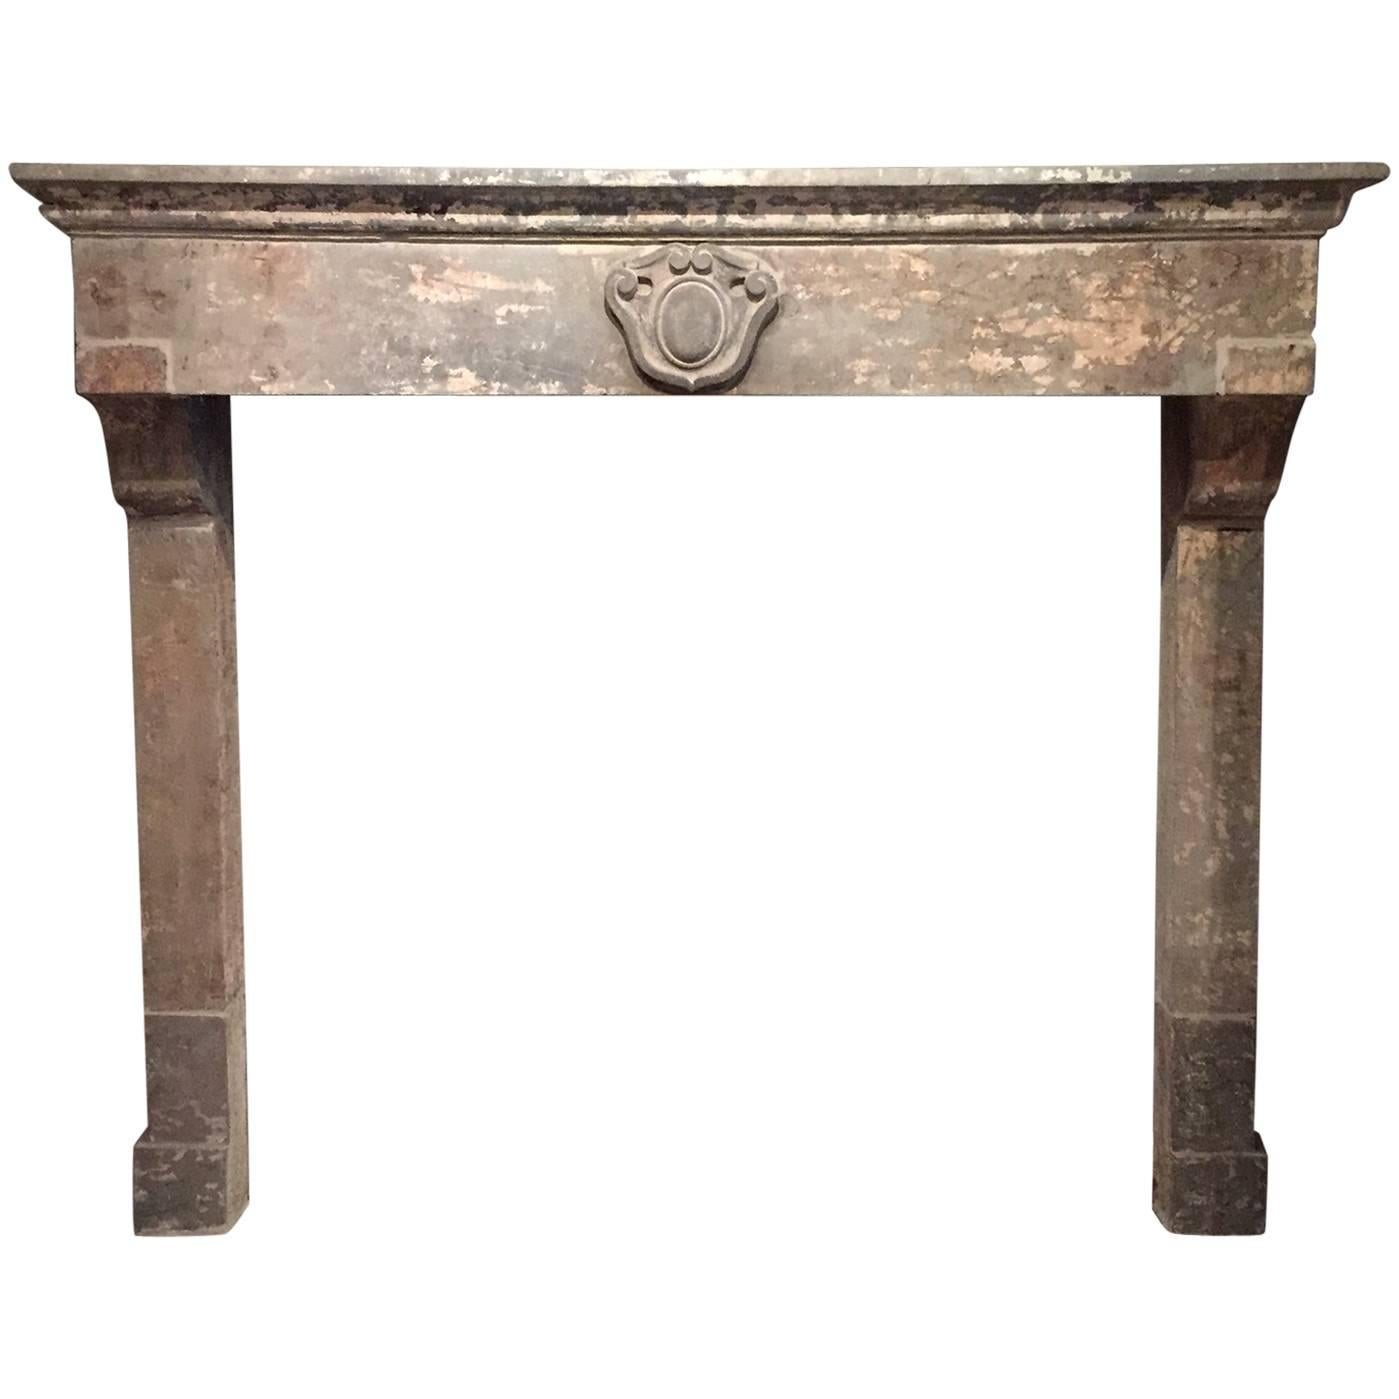 Antique Umbrian Mantel with Crest For Sale